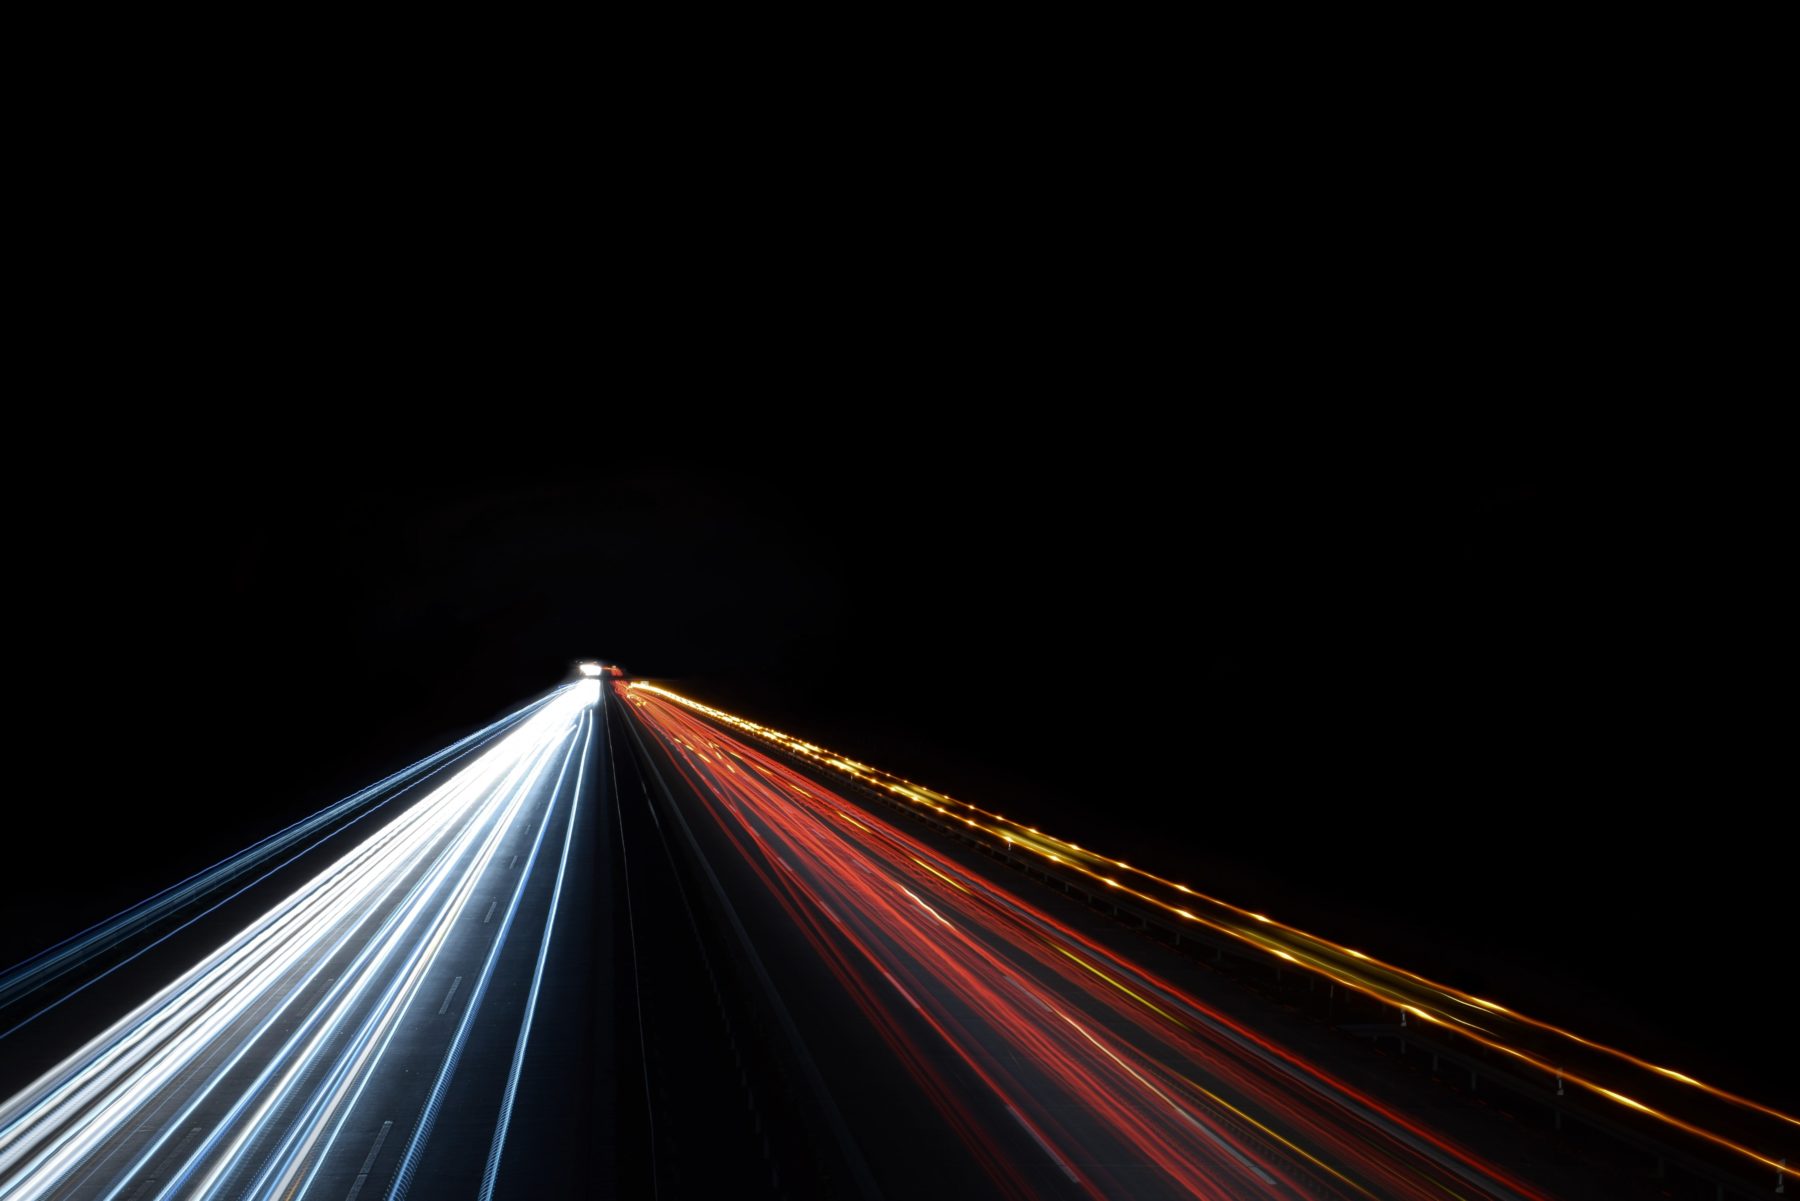 A long exposure of a car driving by on a road at night.